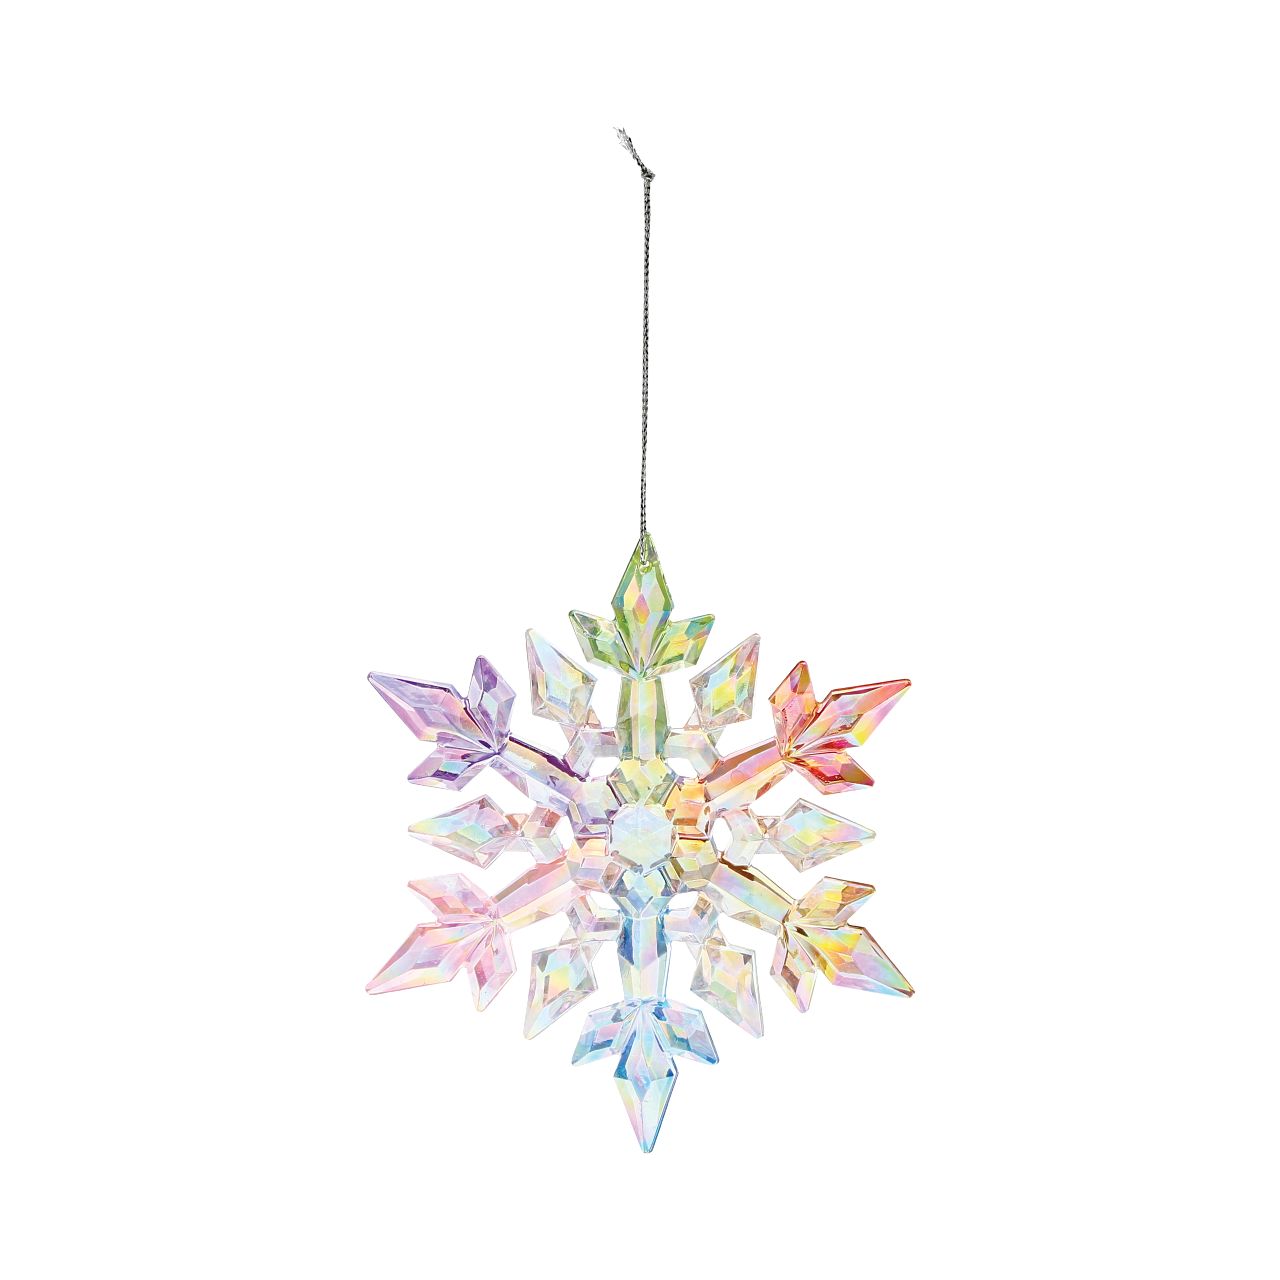 Rainbow Snowflake Hanging Ornament  These Rainbow Snowflake Hanging Ornaments are the perfect gift for yourself or a friend. Not only they sparkle and shine on a Christmas Tree, they looks wonderful as an addition to a gift bag or in any home.